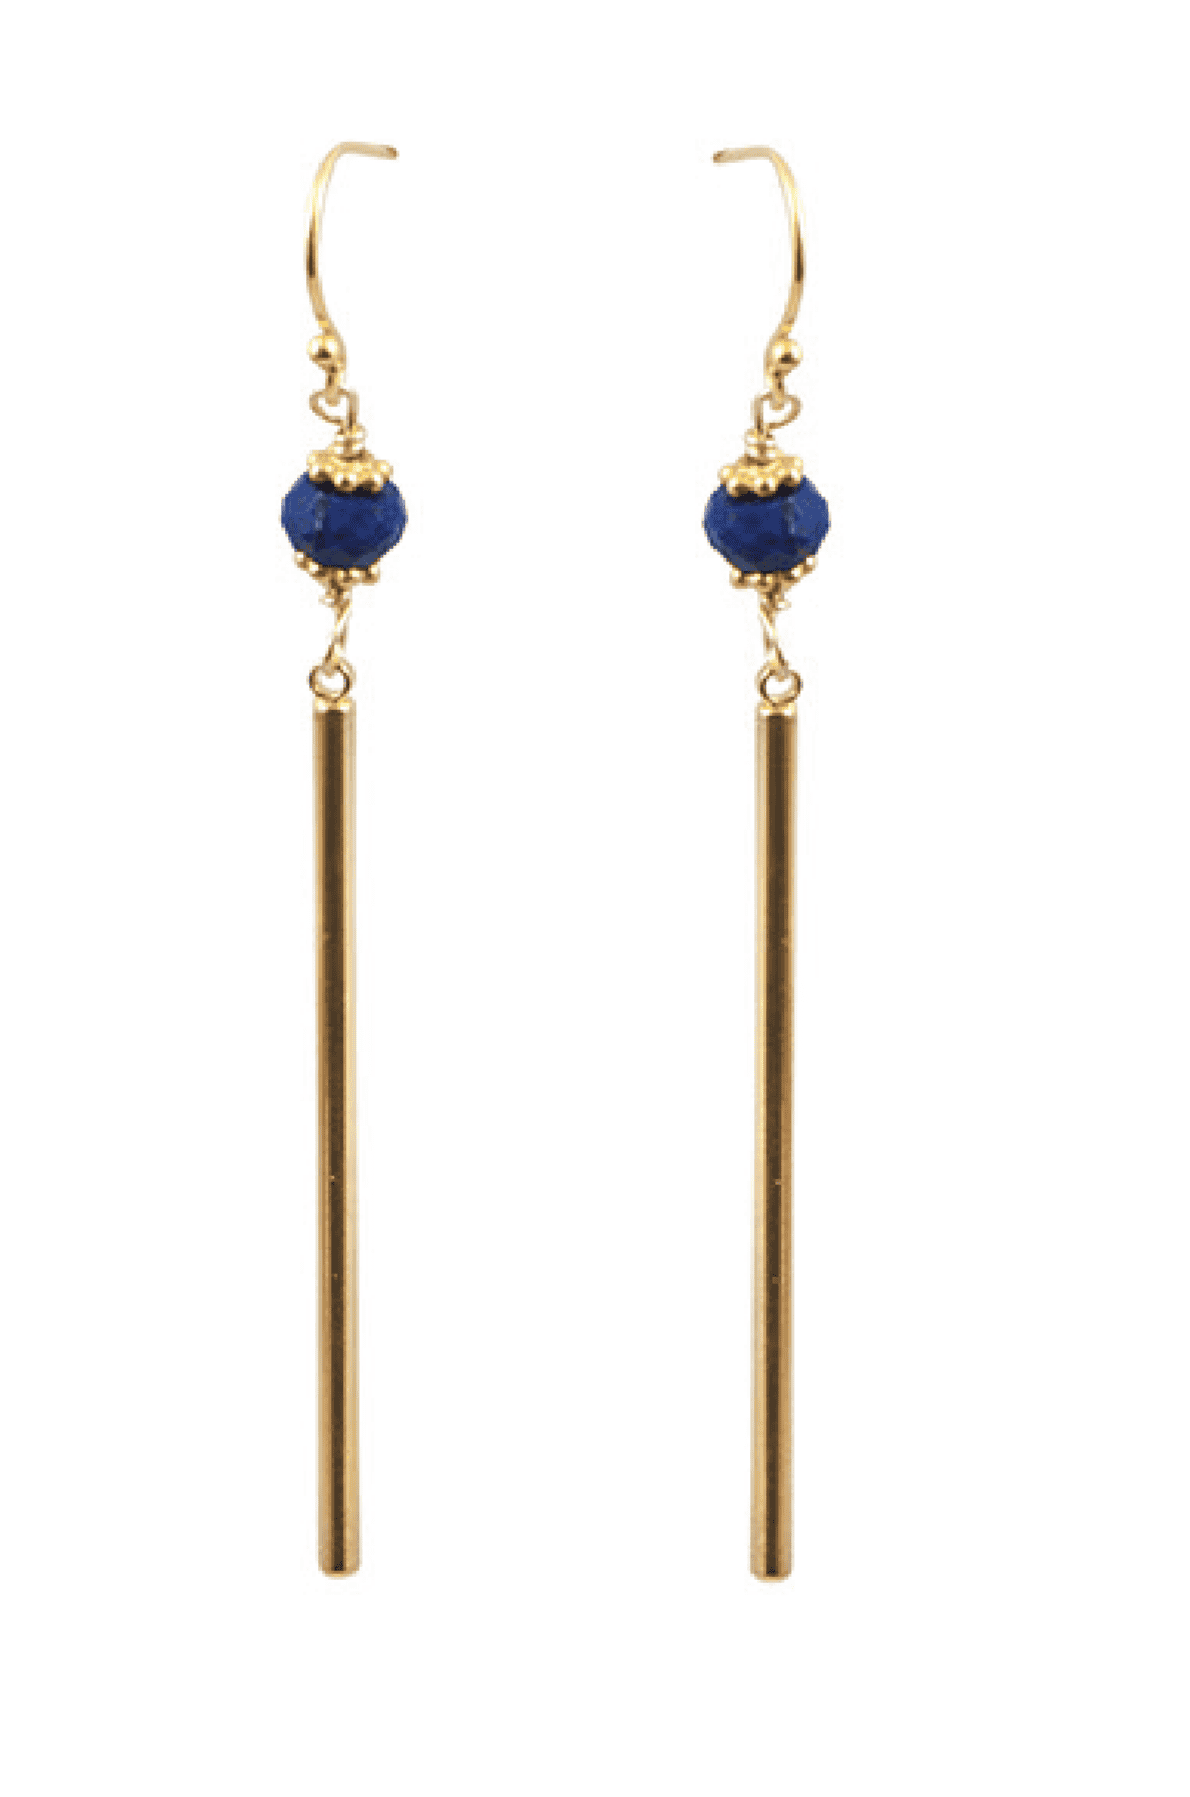 Blue Lapis and Gold Earrings